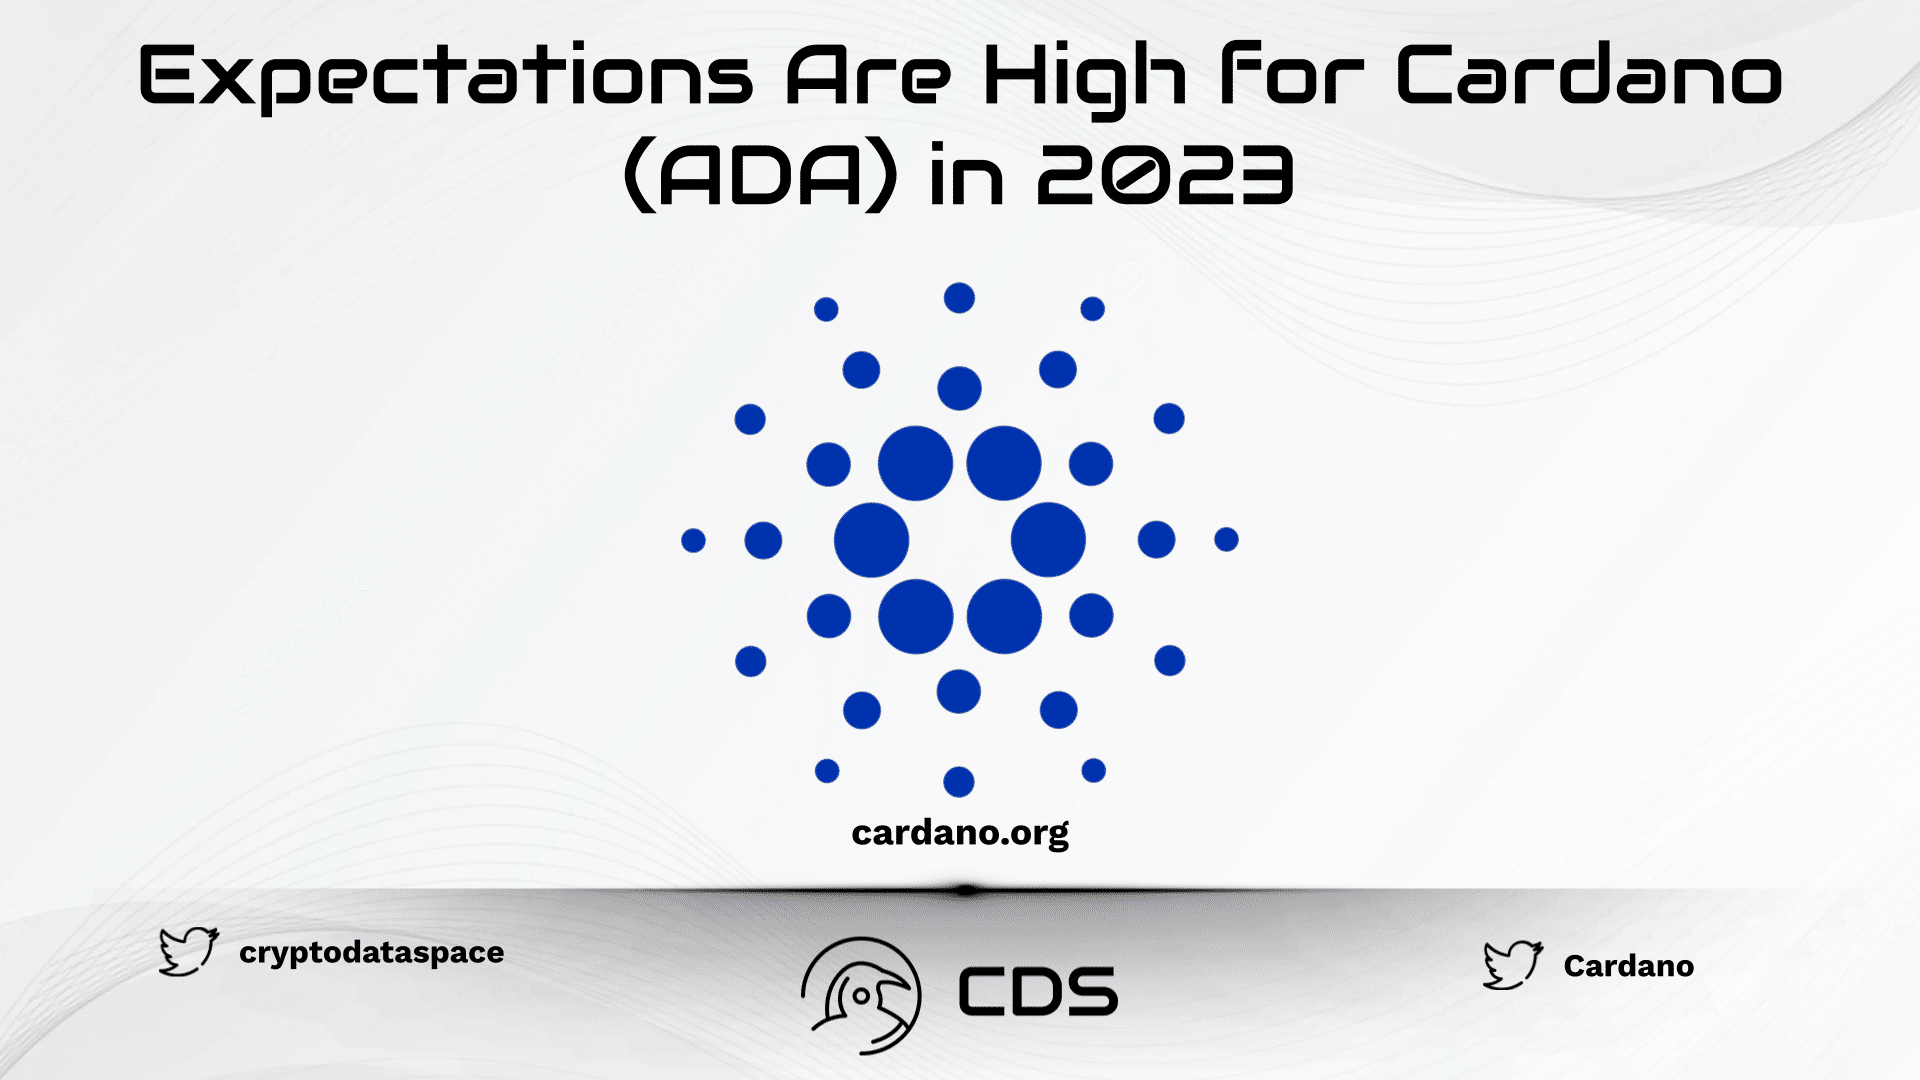 Expectations Are High for Cardano (ADA) in 2023